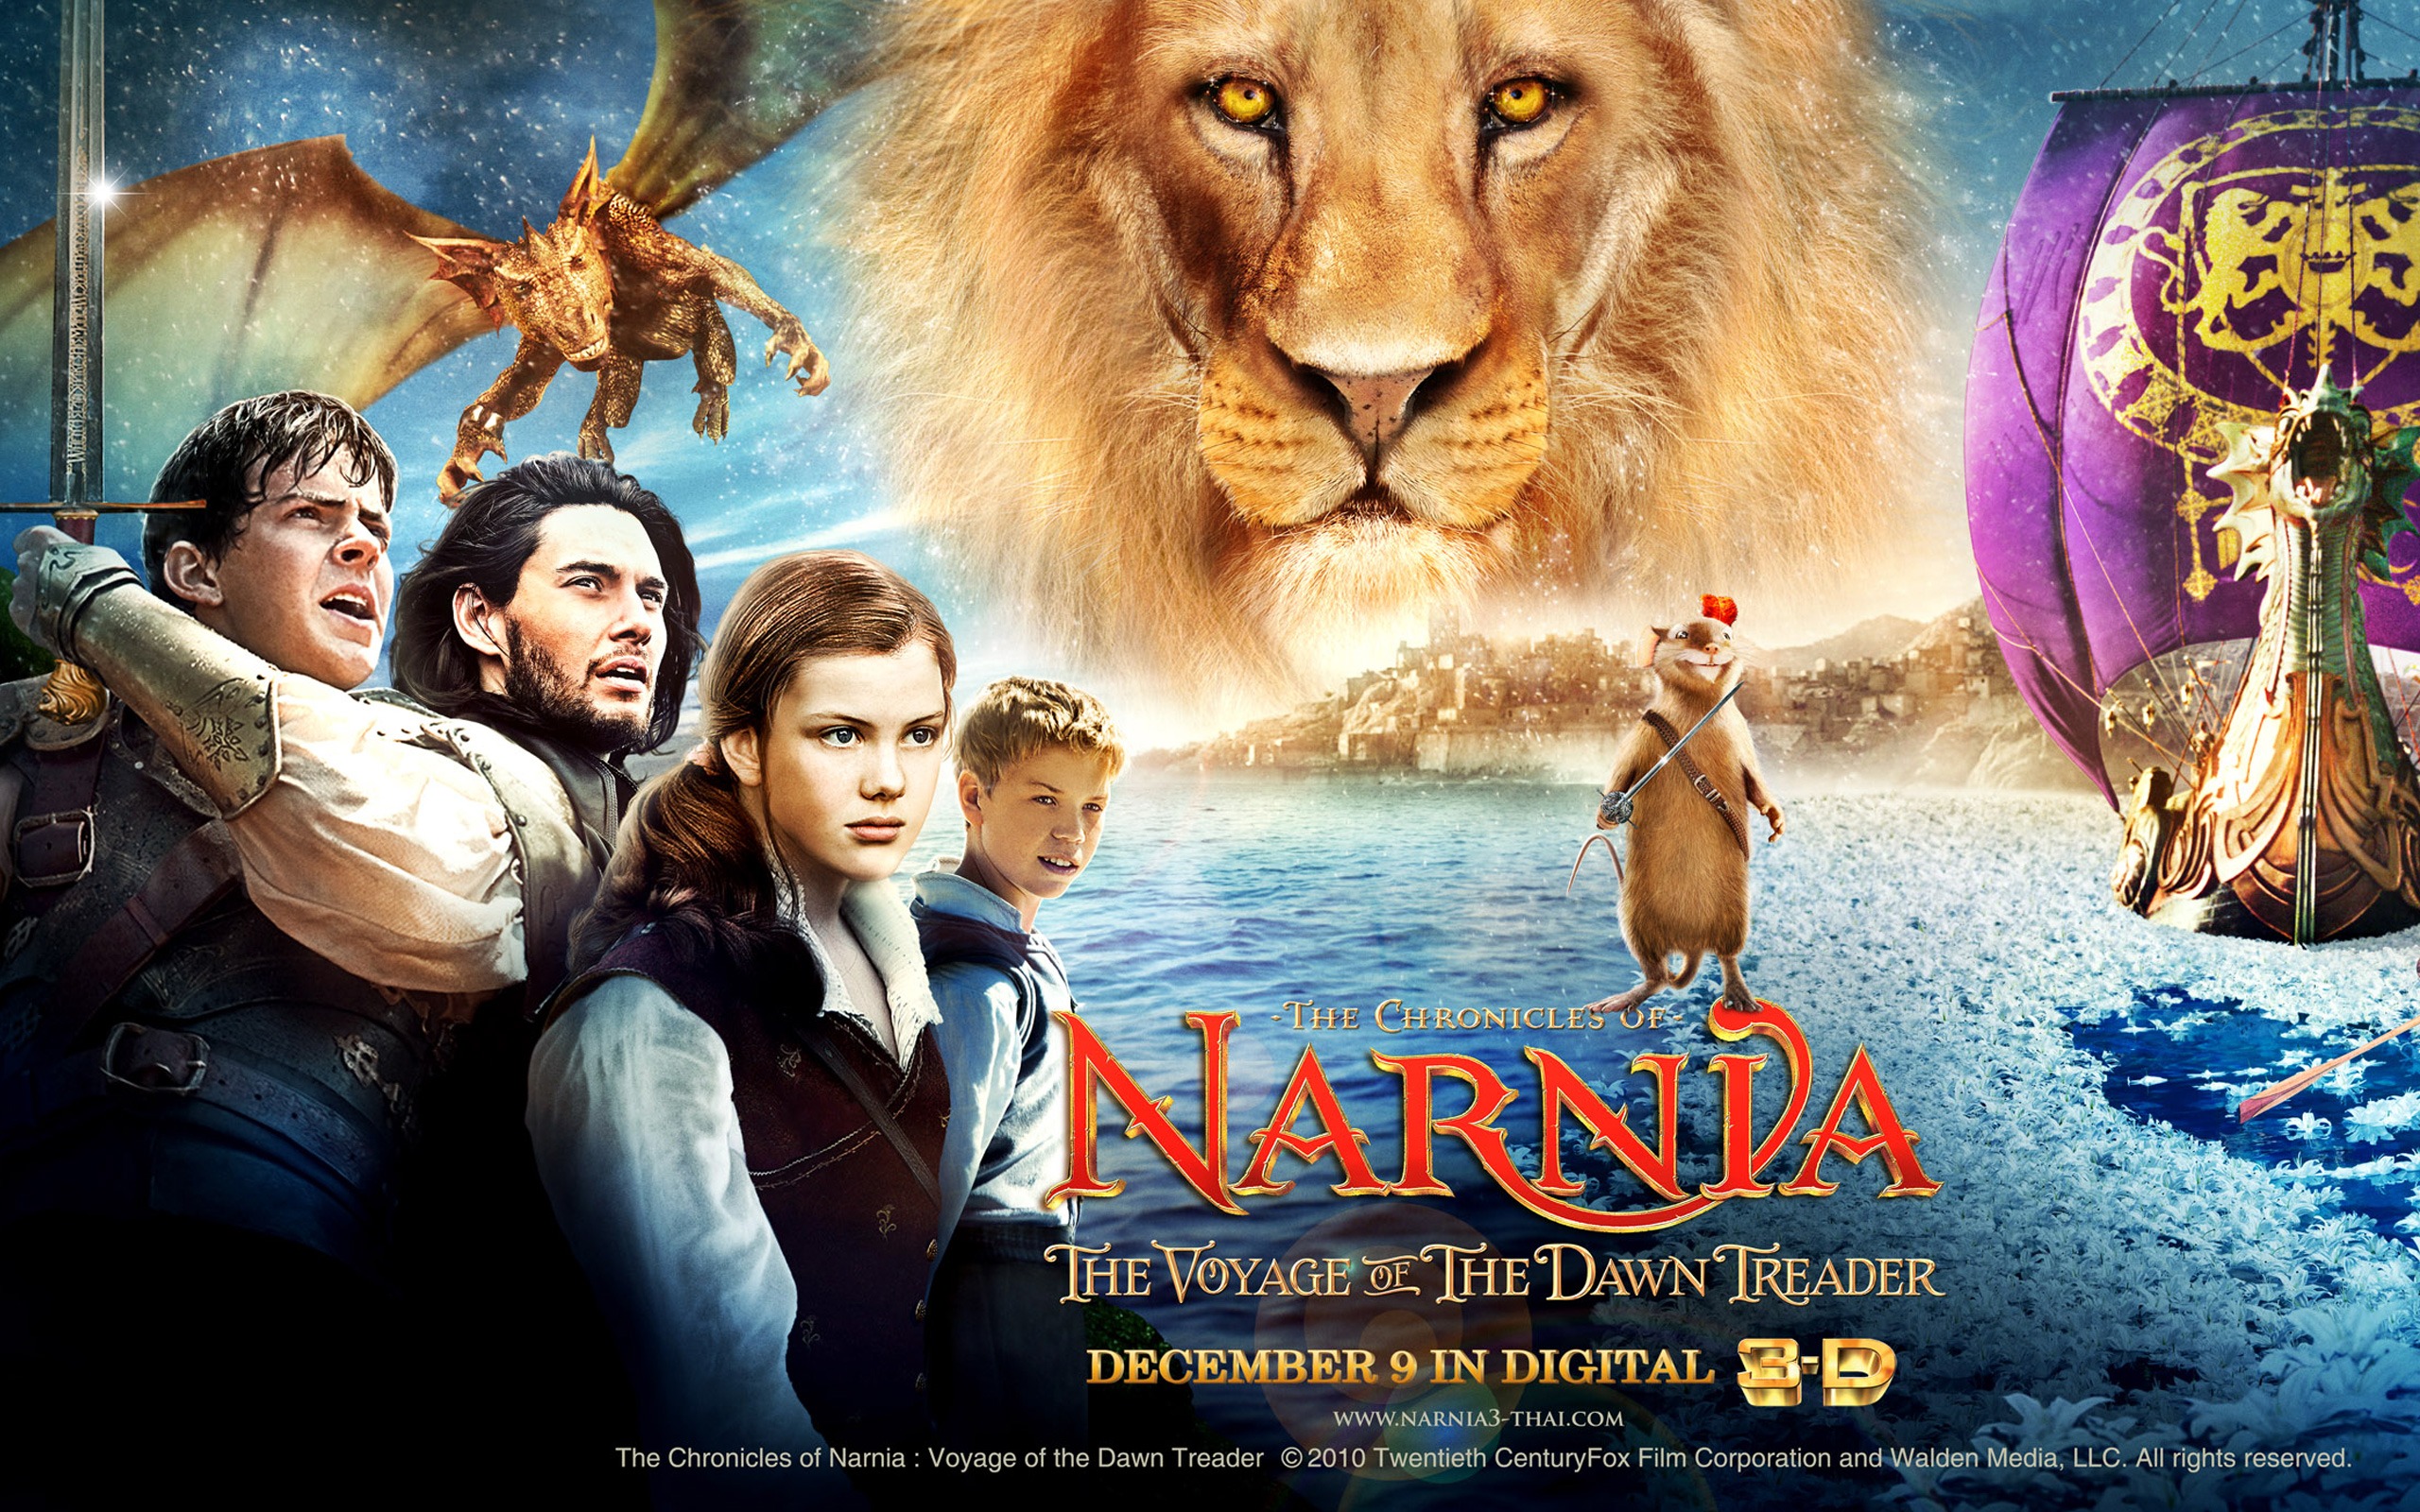 The Chronicles of Narnia: The Voyage of the Dawn Treader wallpapers #14 - 2560x1600